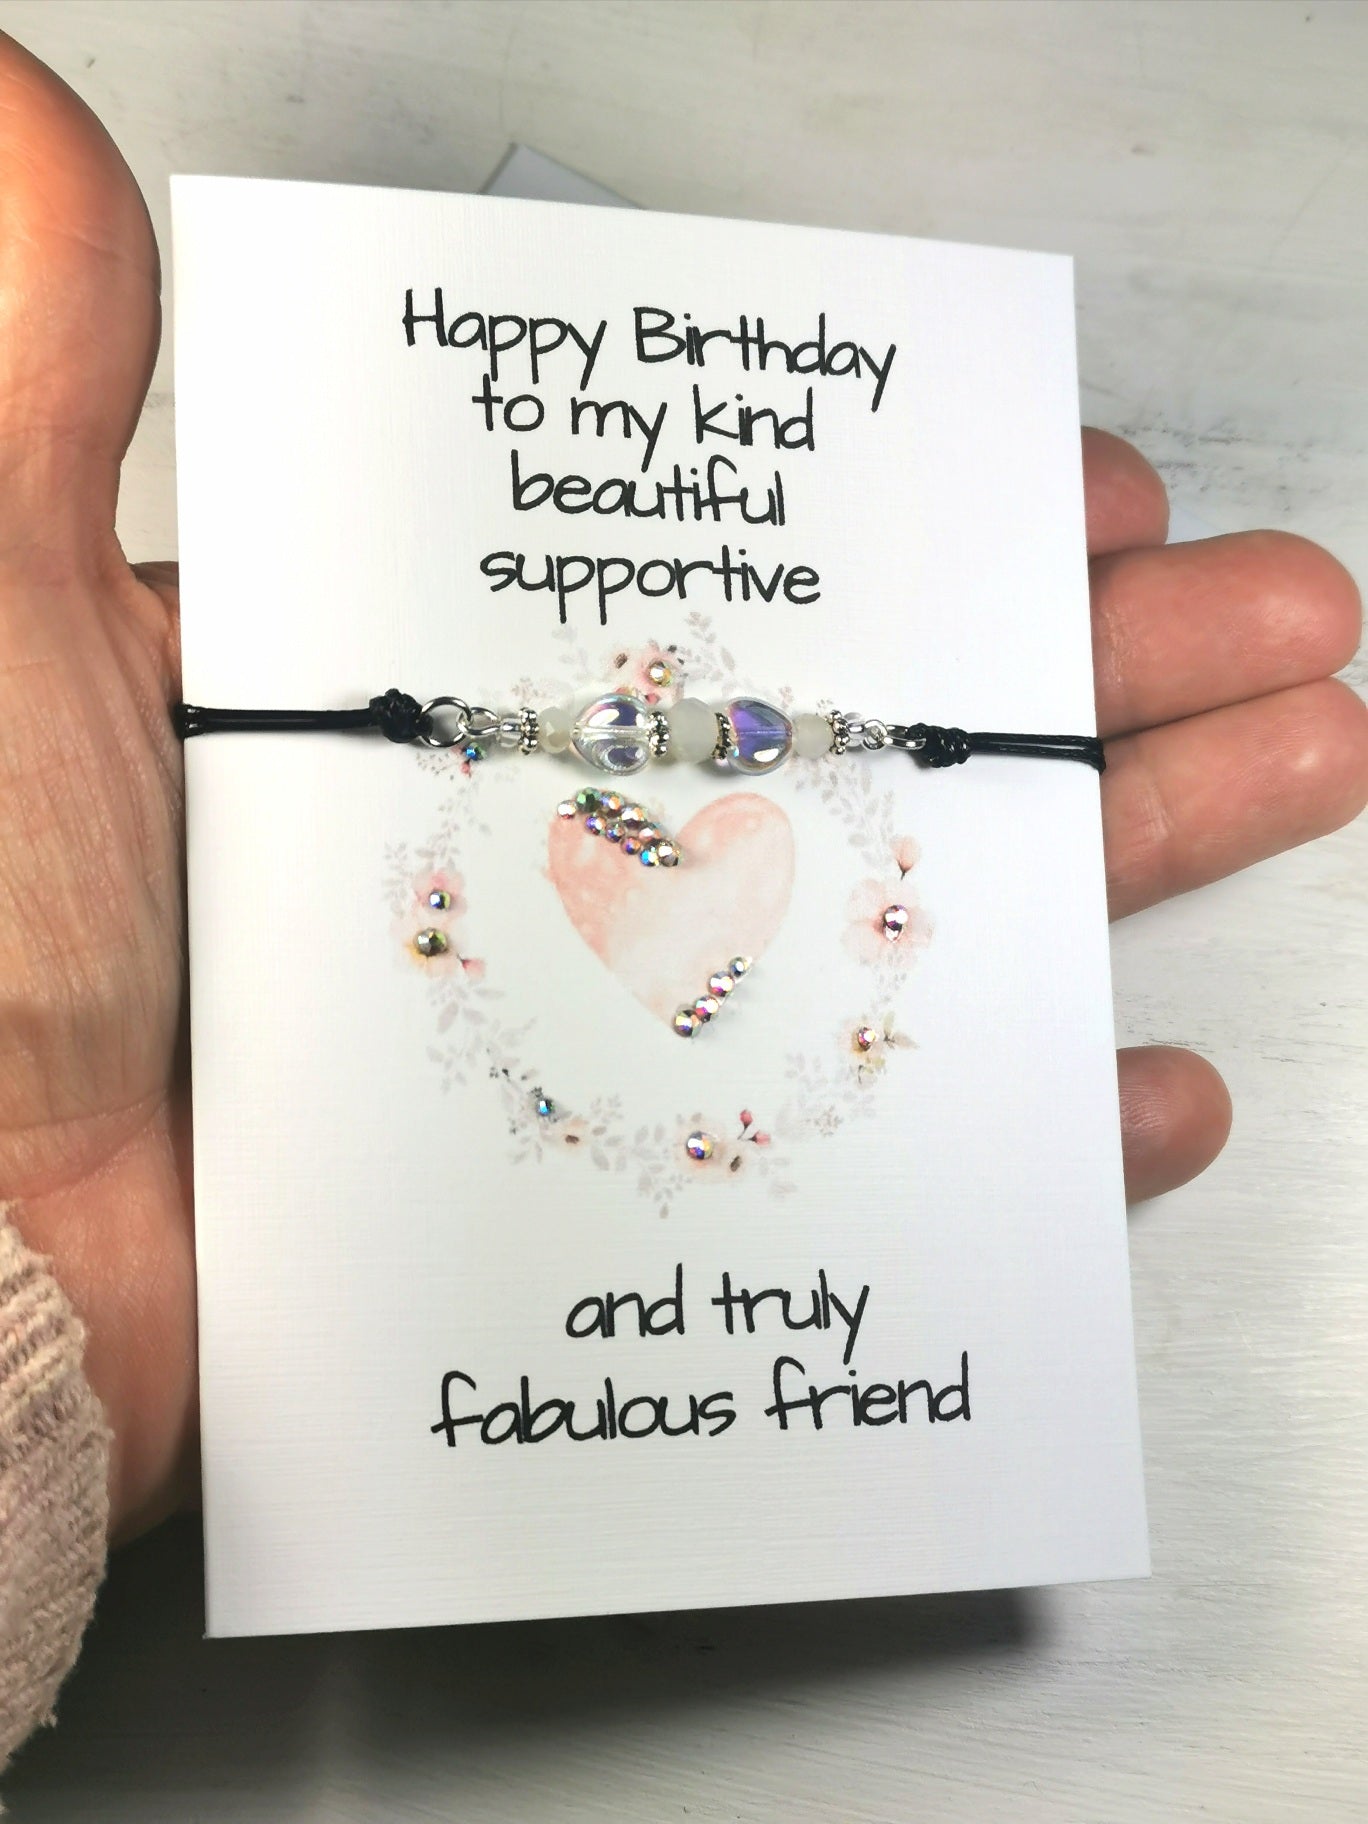 Happy Birthday to my Kind Beautiful supportive and truly Fabulous Friend Bracelet Gift Card